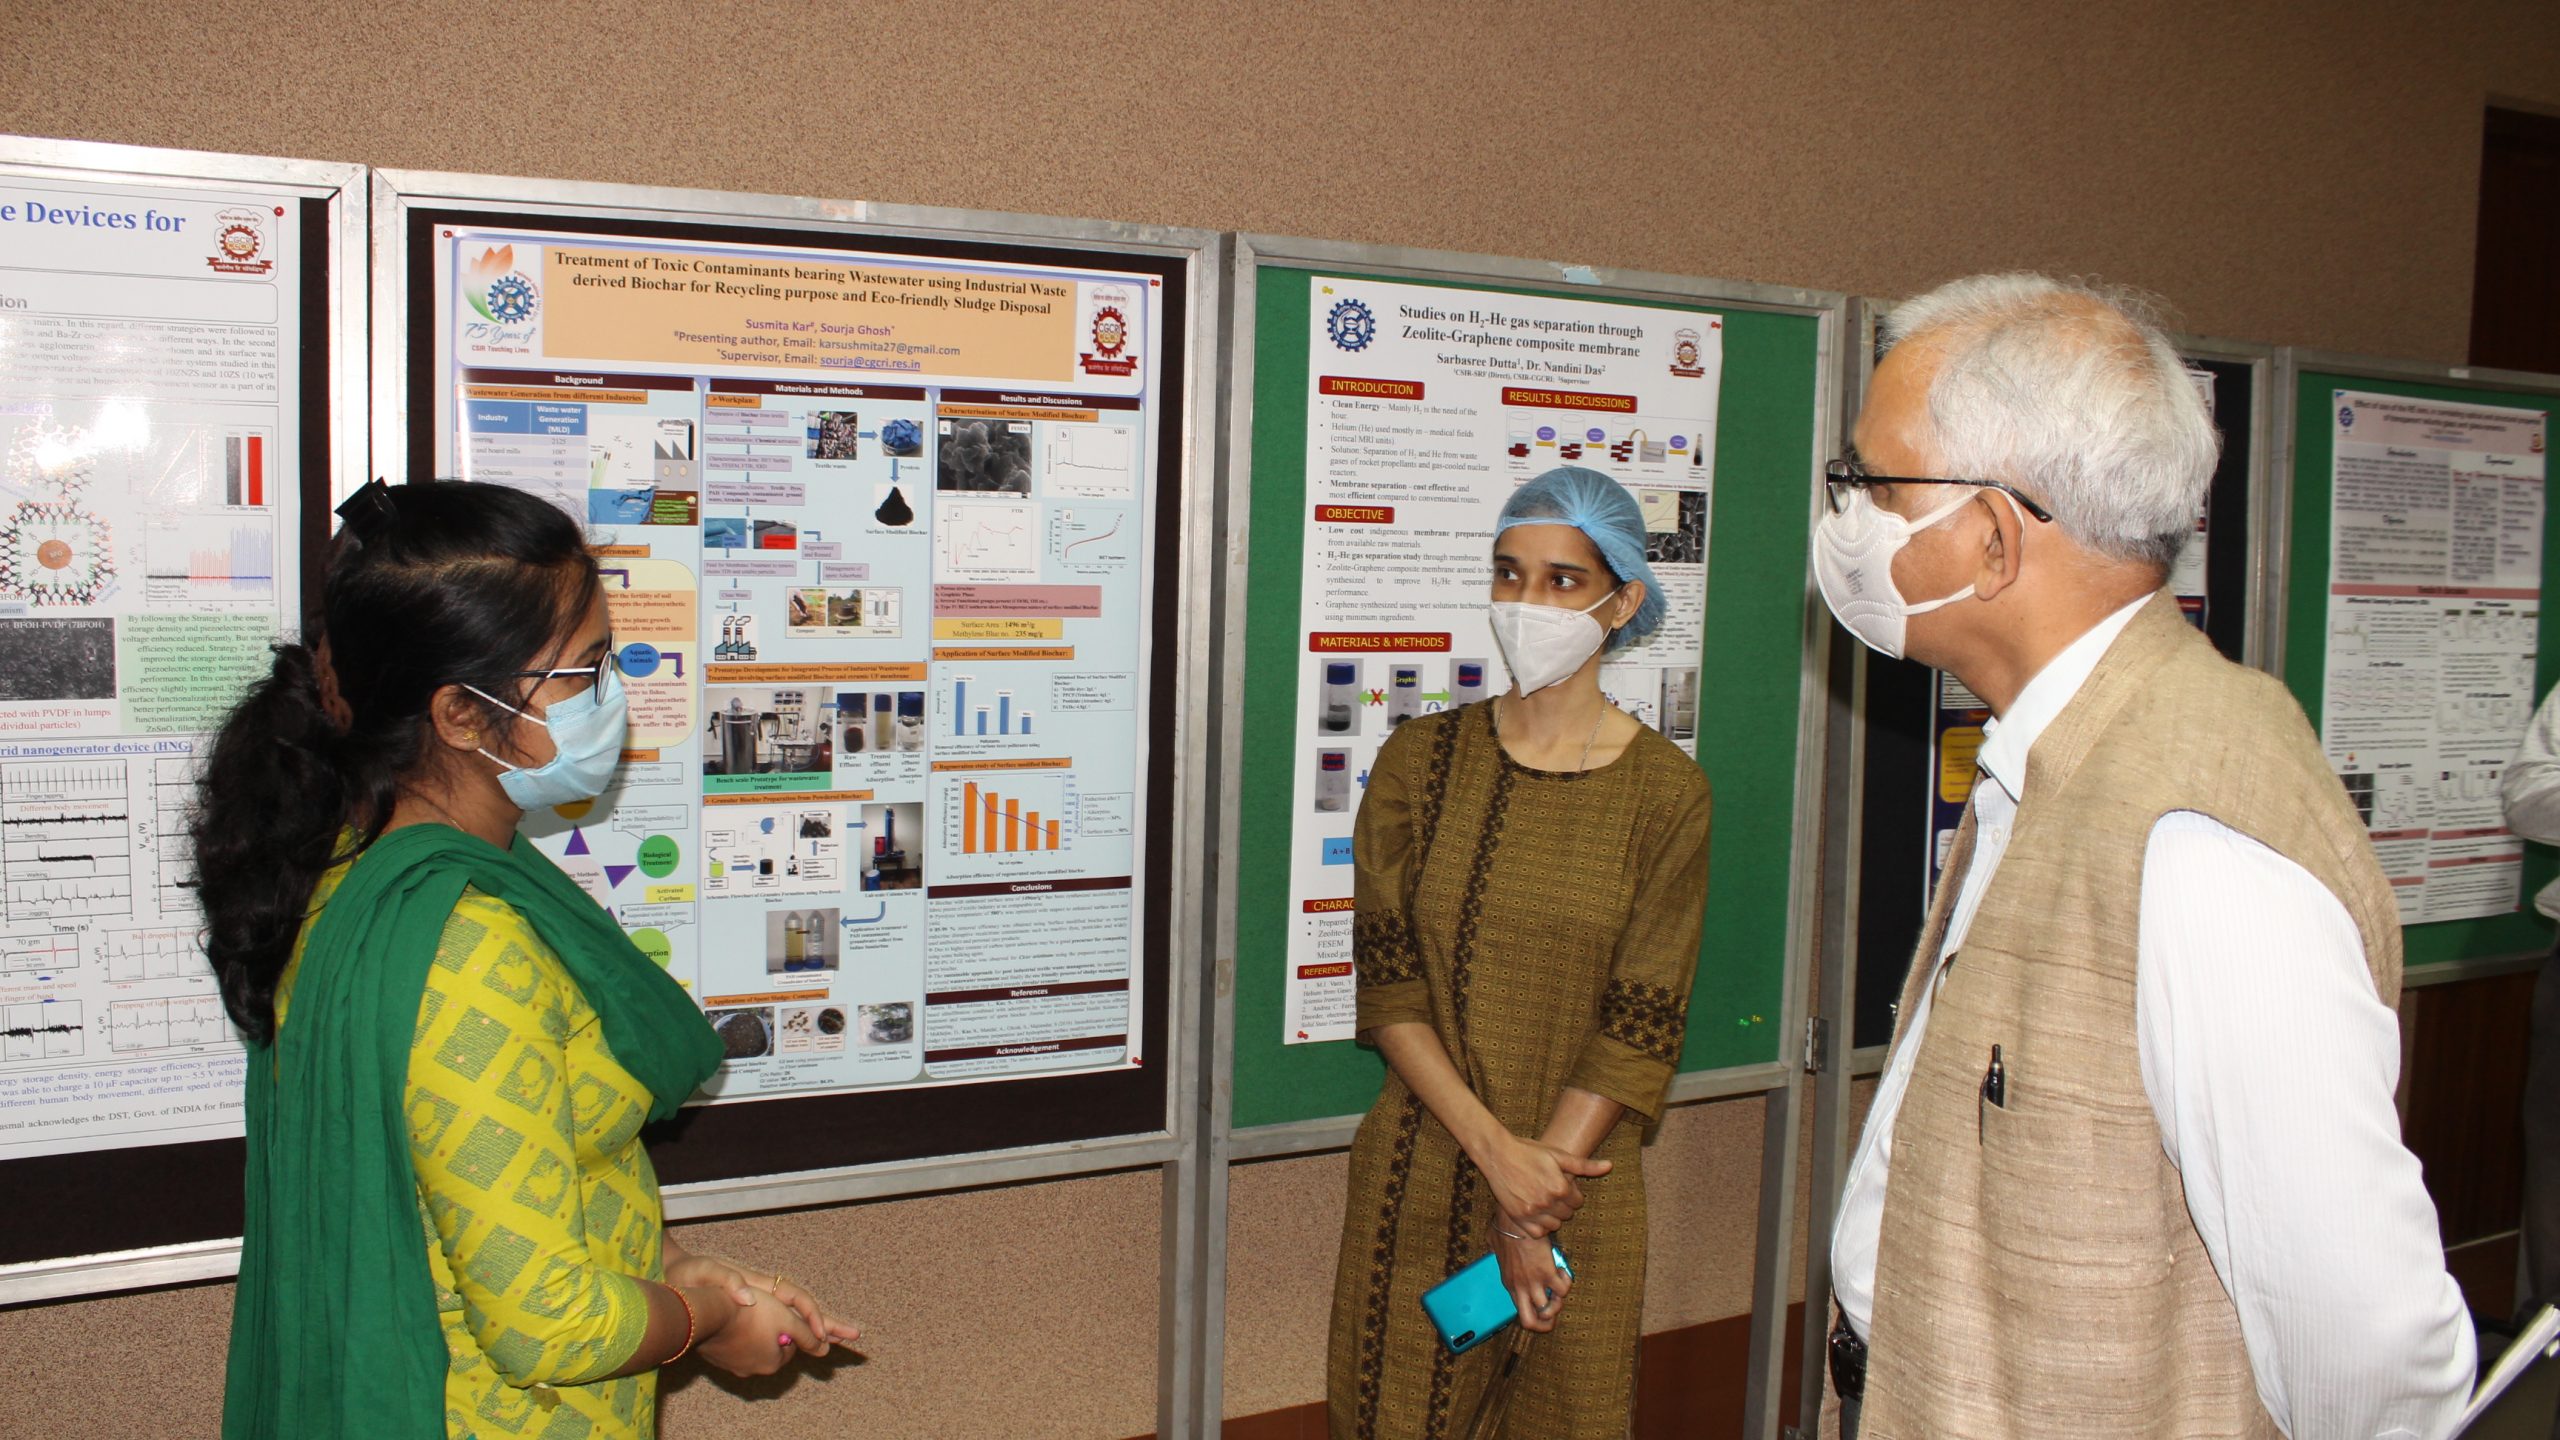 Poster presentation to DG CSIR by the Students